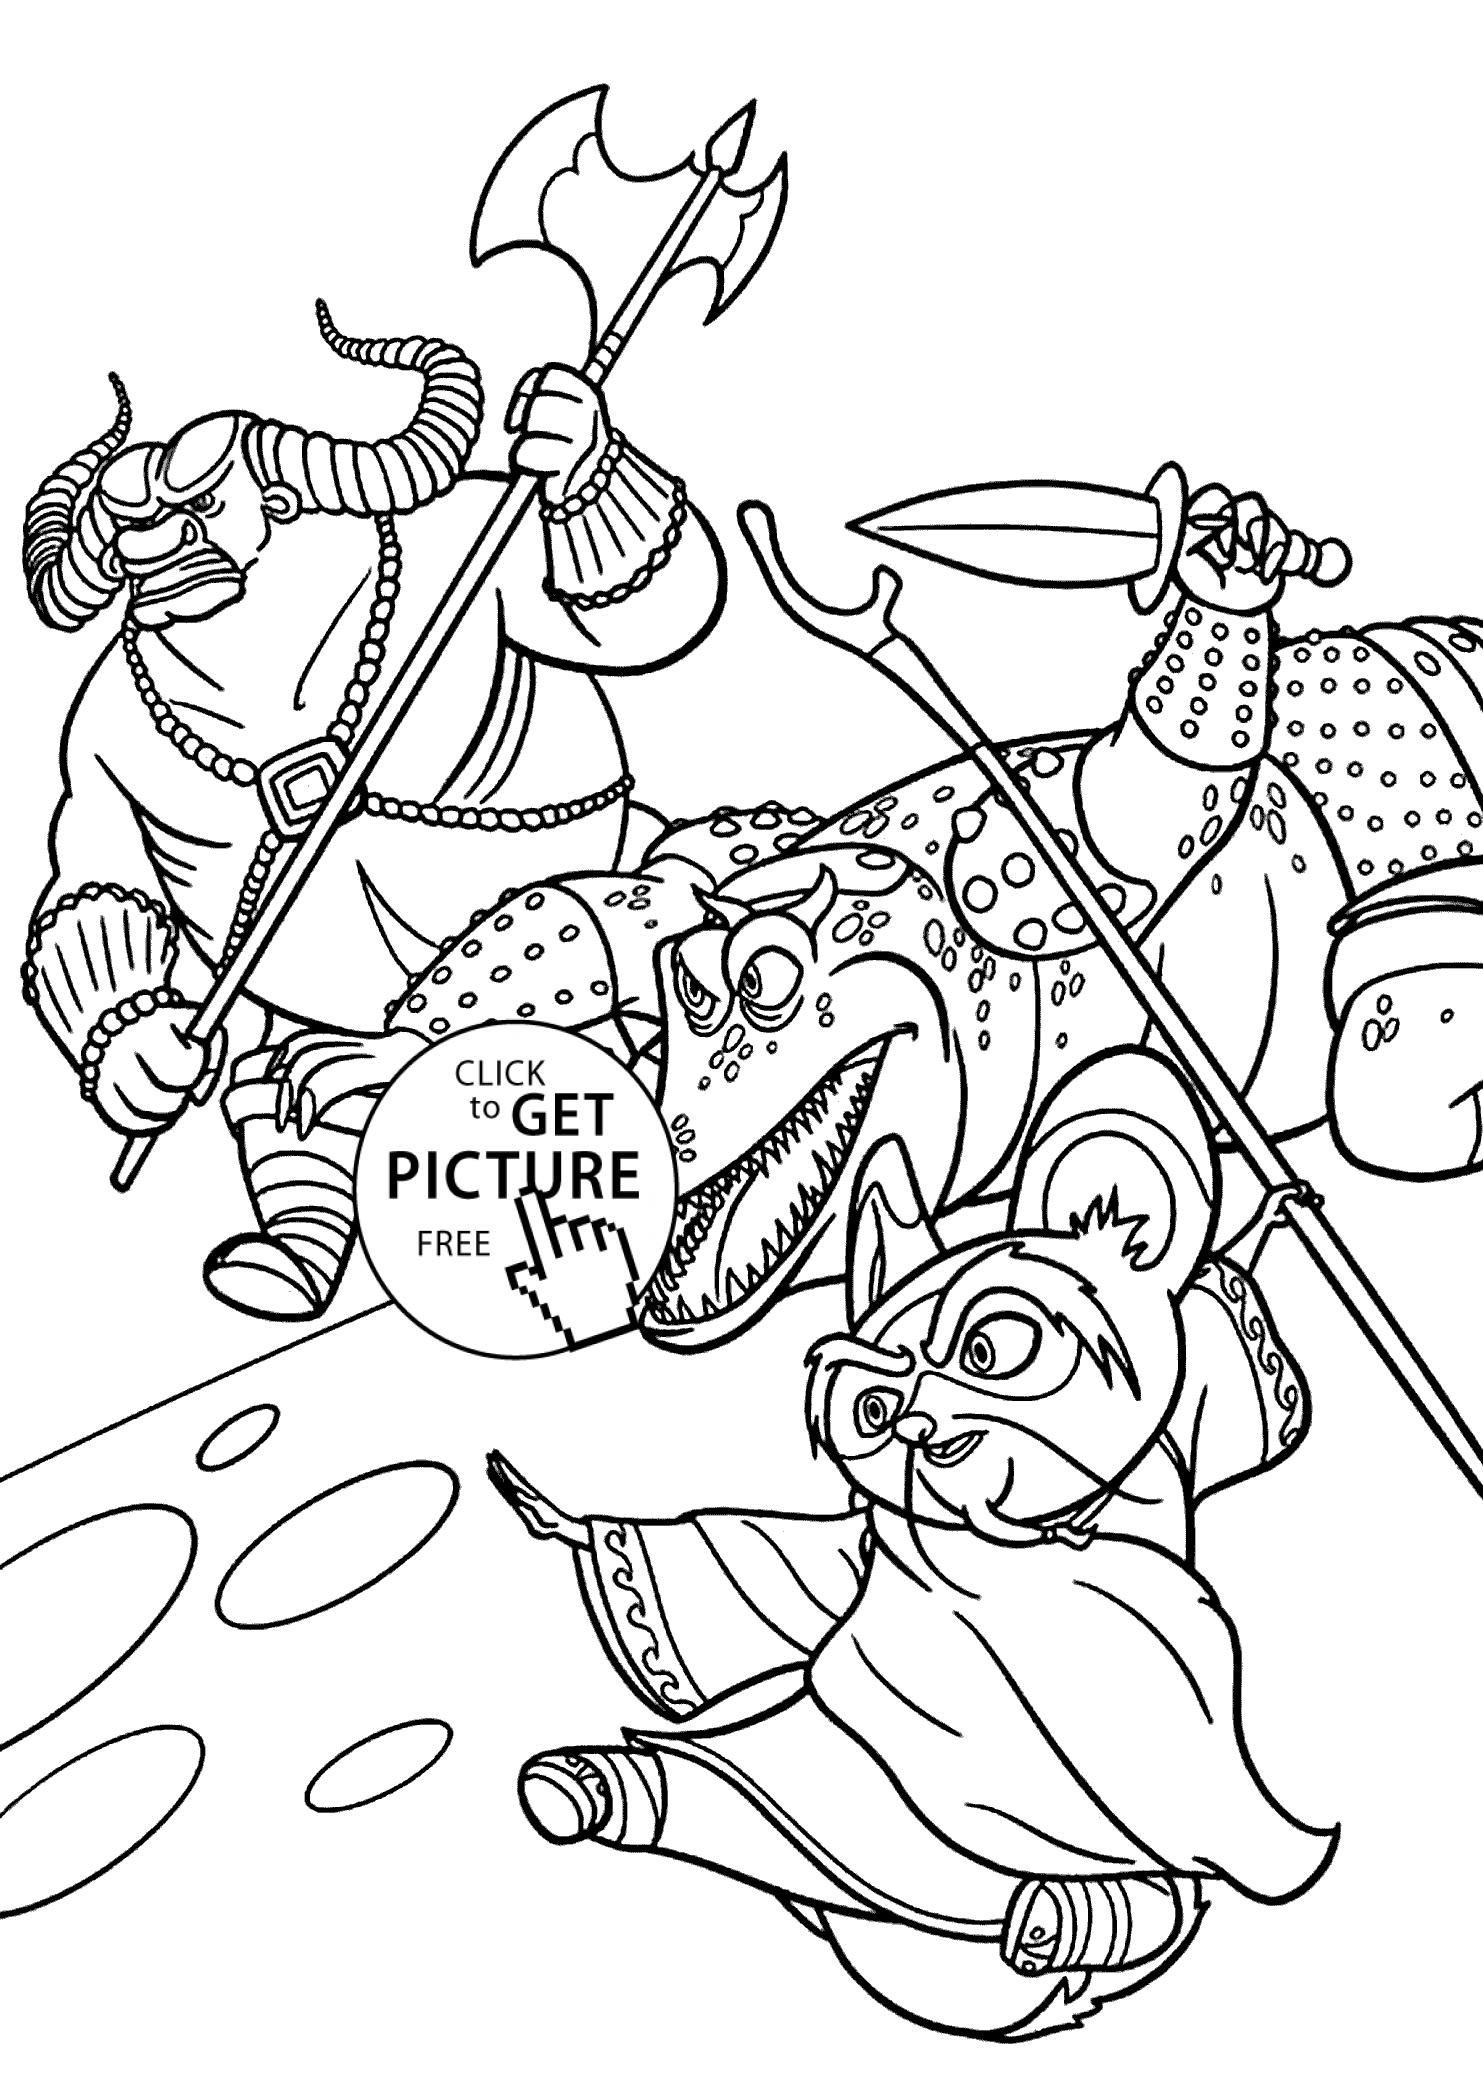 Master Shifu from Kung Fu Panda coloring pages for kids, printable free